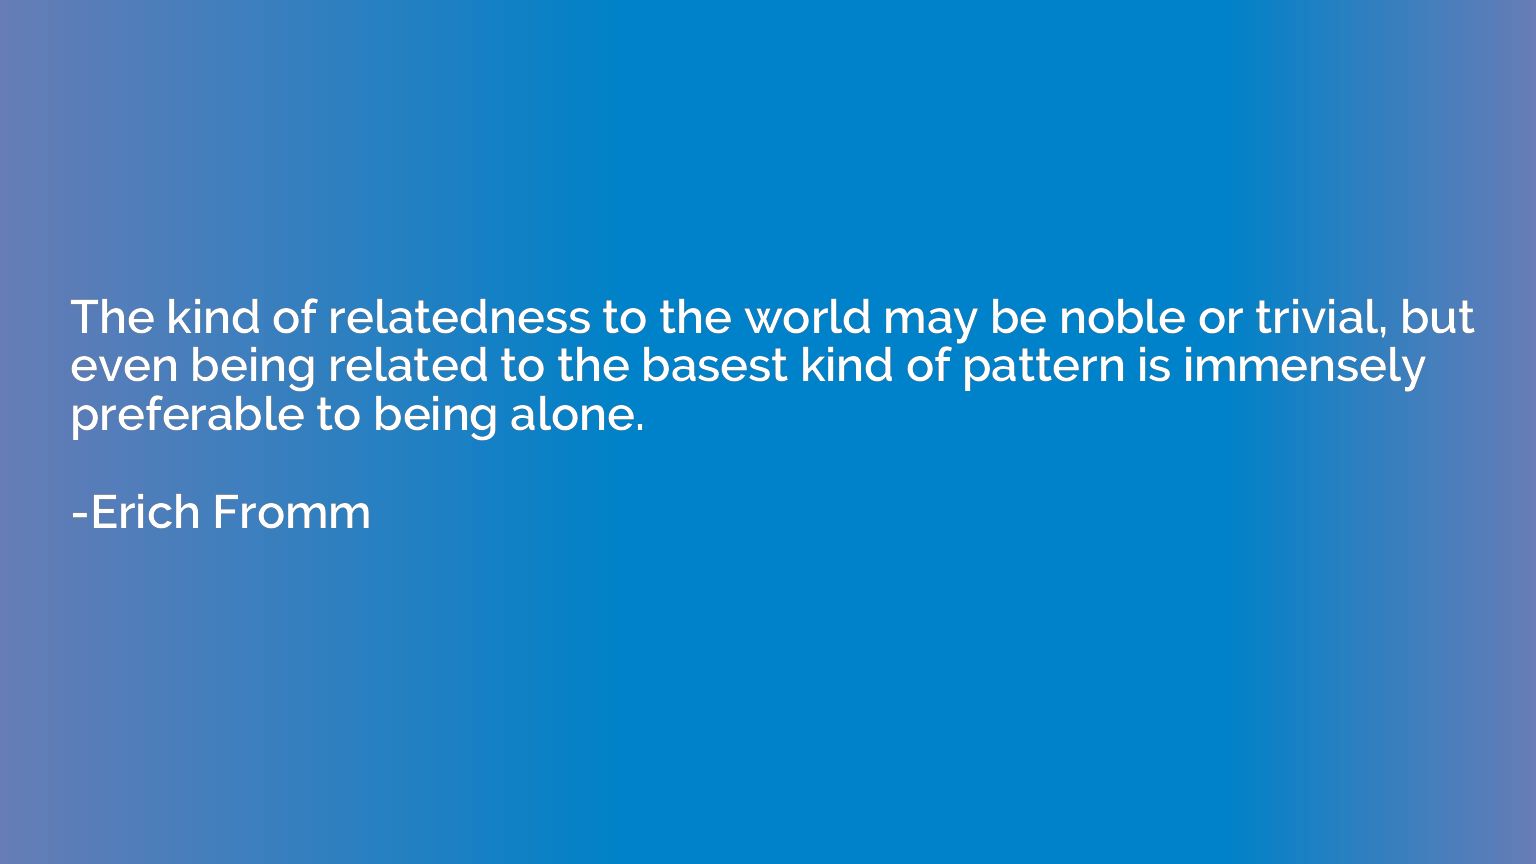 The kind of relatedness to the world may be noble or trivial